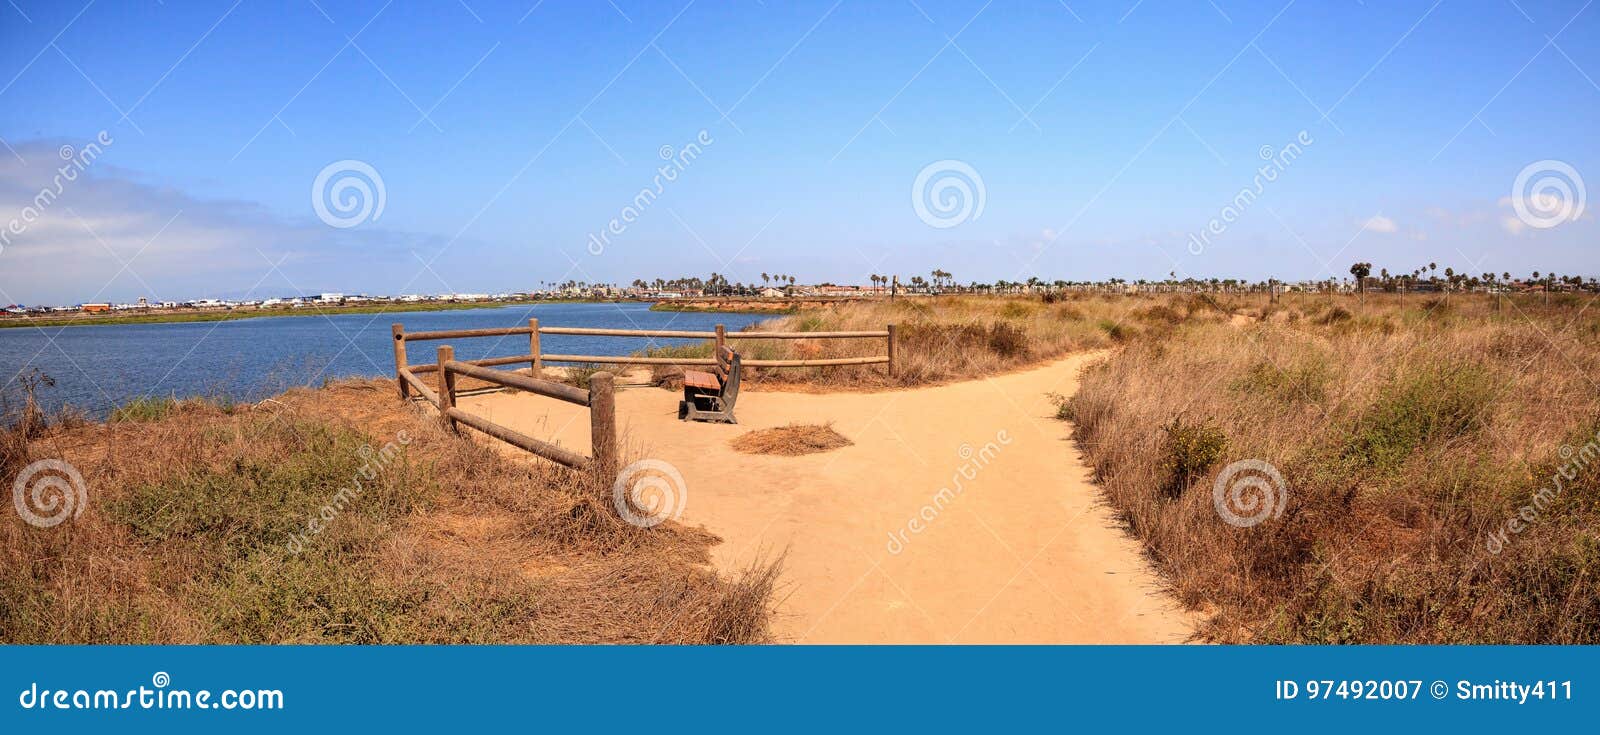 bench overlooking the peaceful and tranquil marsh of bolsa chica wetlands